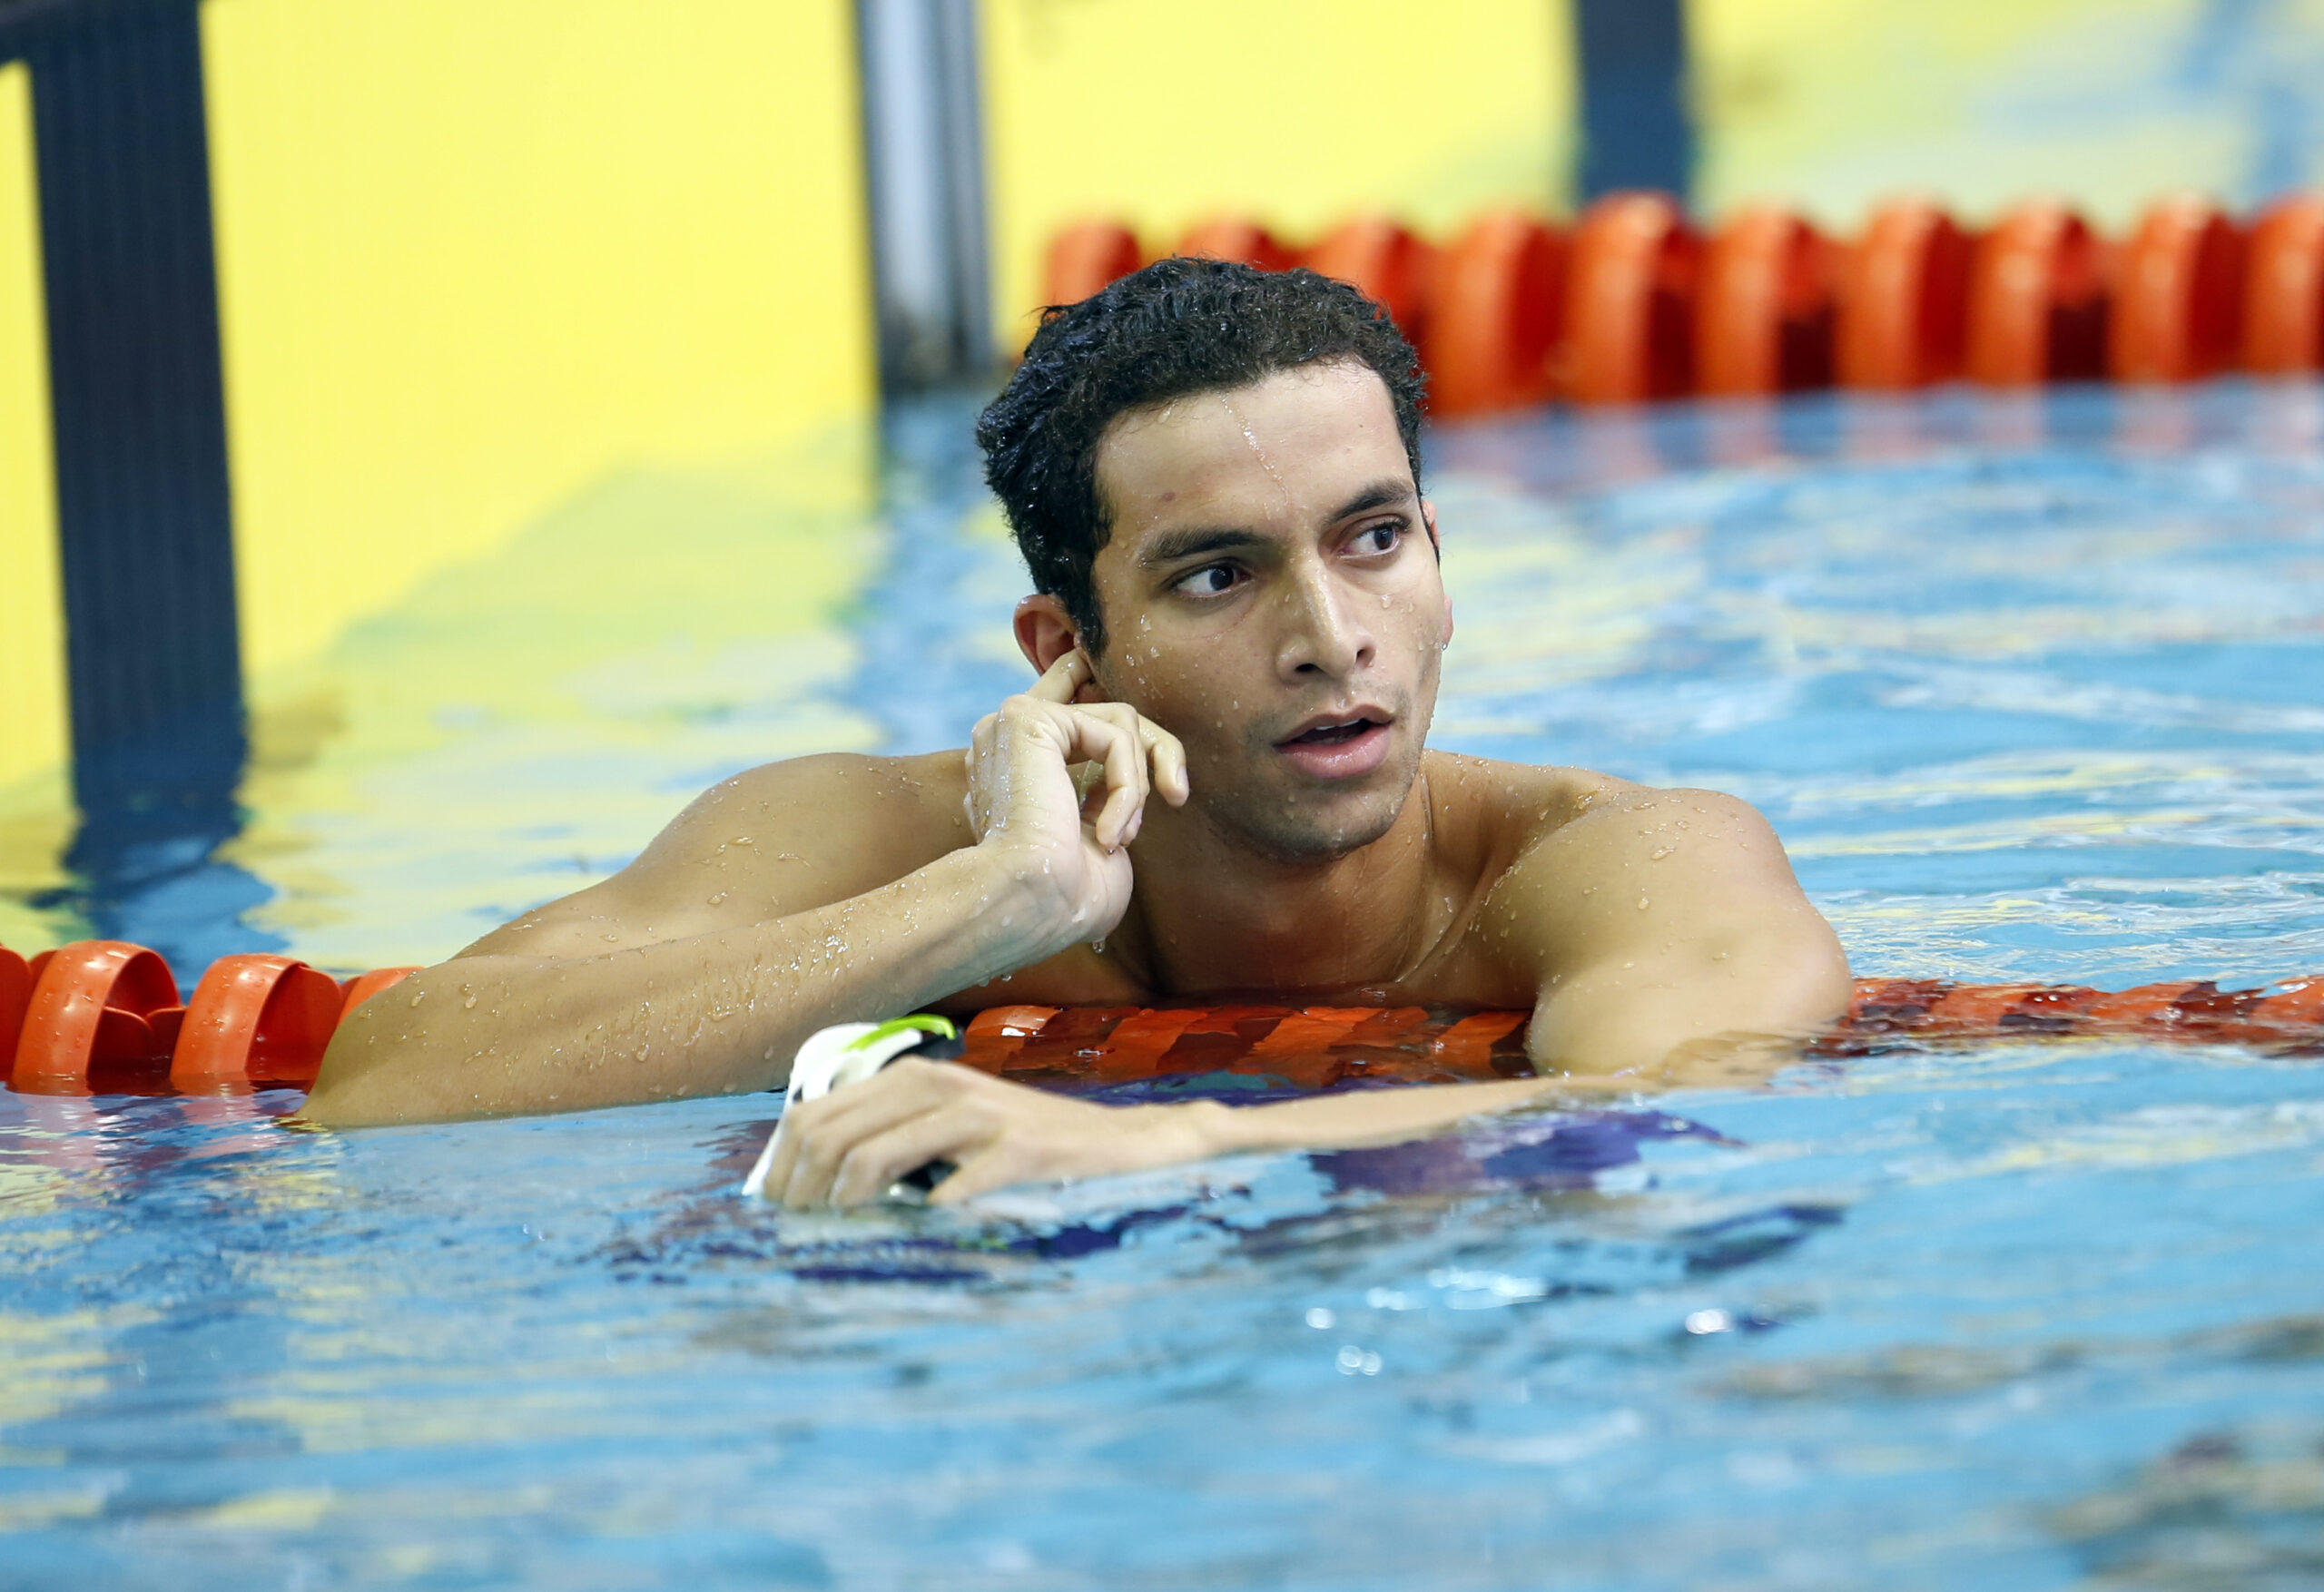 DURBAN, SOUTH AFRICA - APRIL 11: Marwan Elkamash  in the Men 200m LC freestyle heat during day 2 of the SA National Aquatic Championships 2016 at Kings Park Aquatic Centre on April 11, 2016 in Durban, South Africa. (Photo by Steve Haag/Gallo Images)